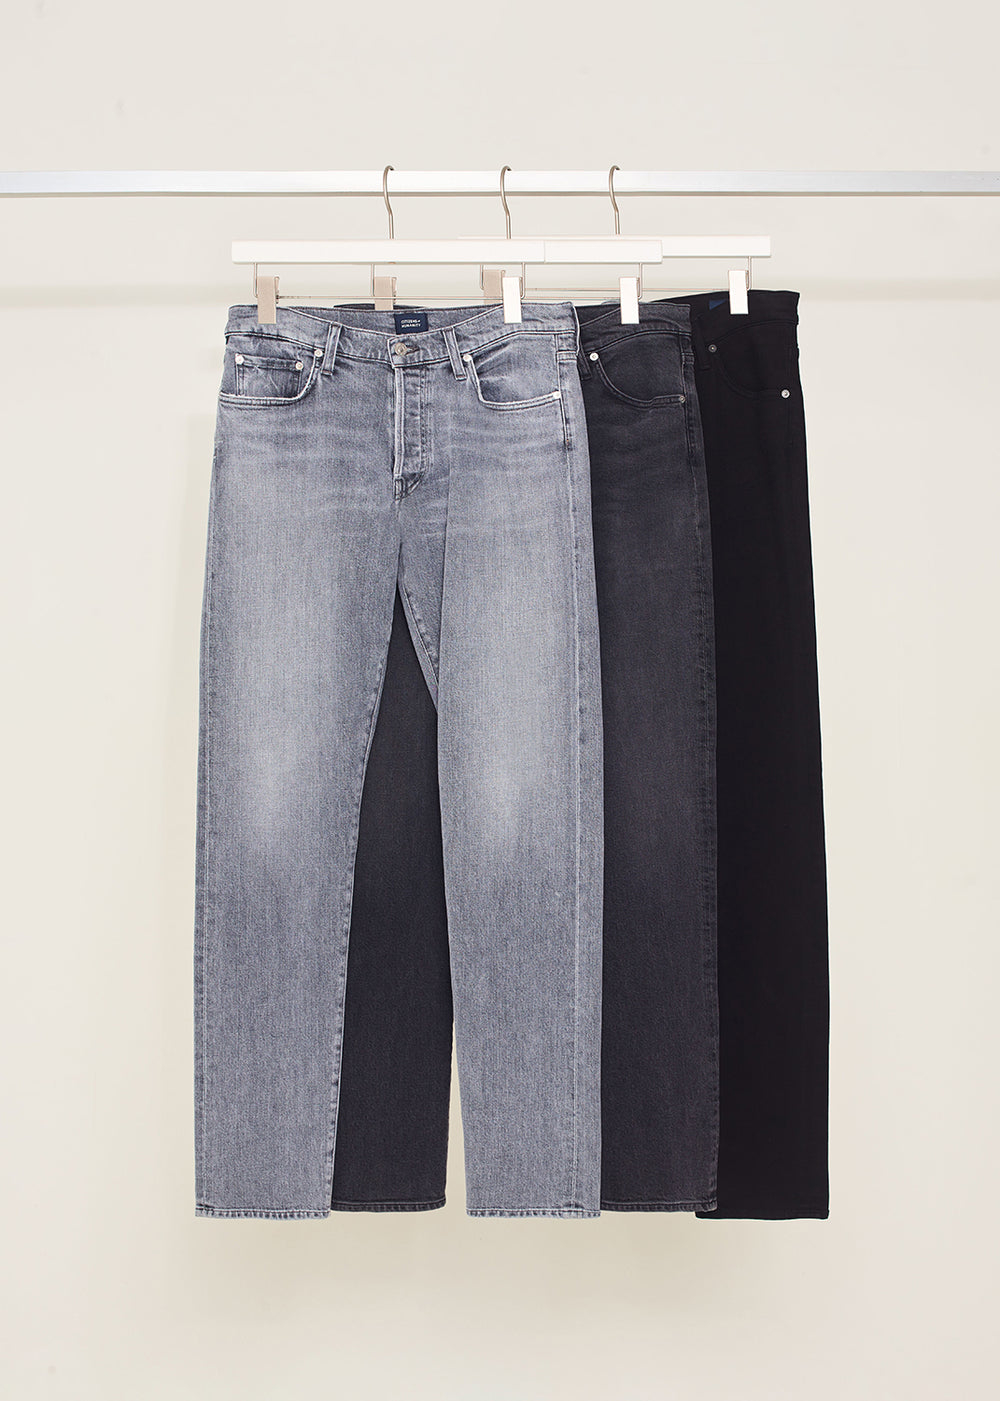 H&M - Embrace our Embrace fit: these smart stretch jeans